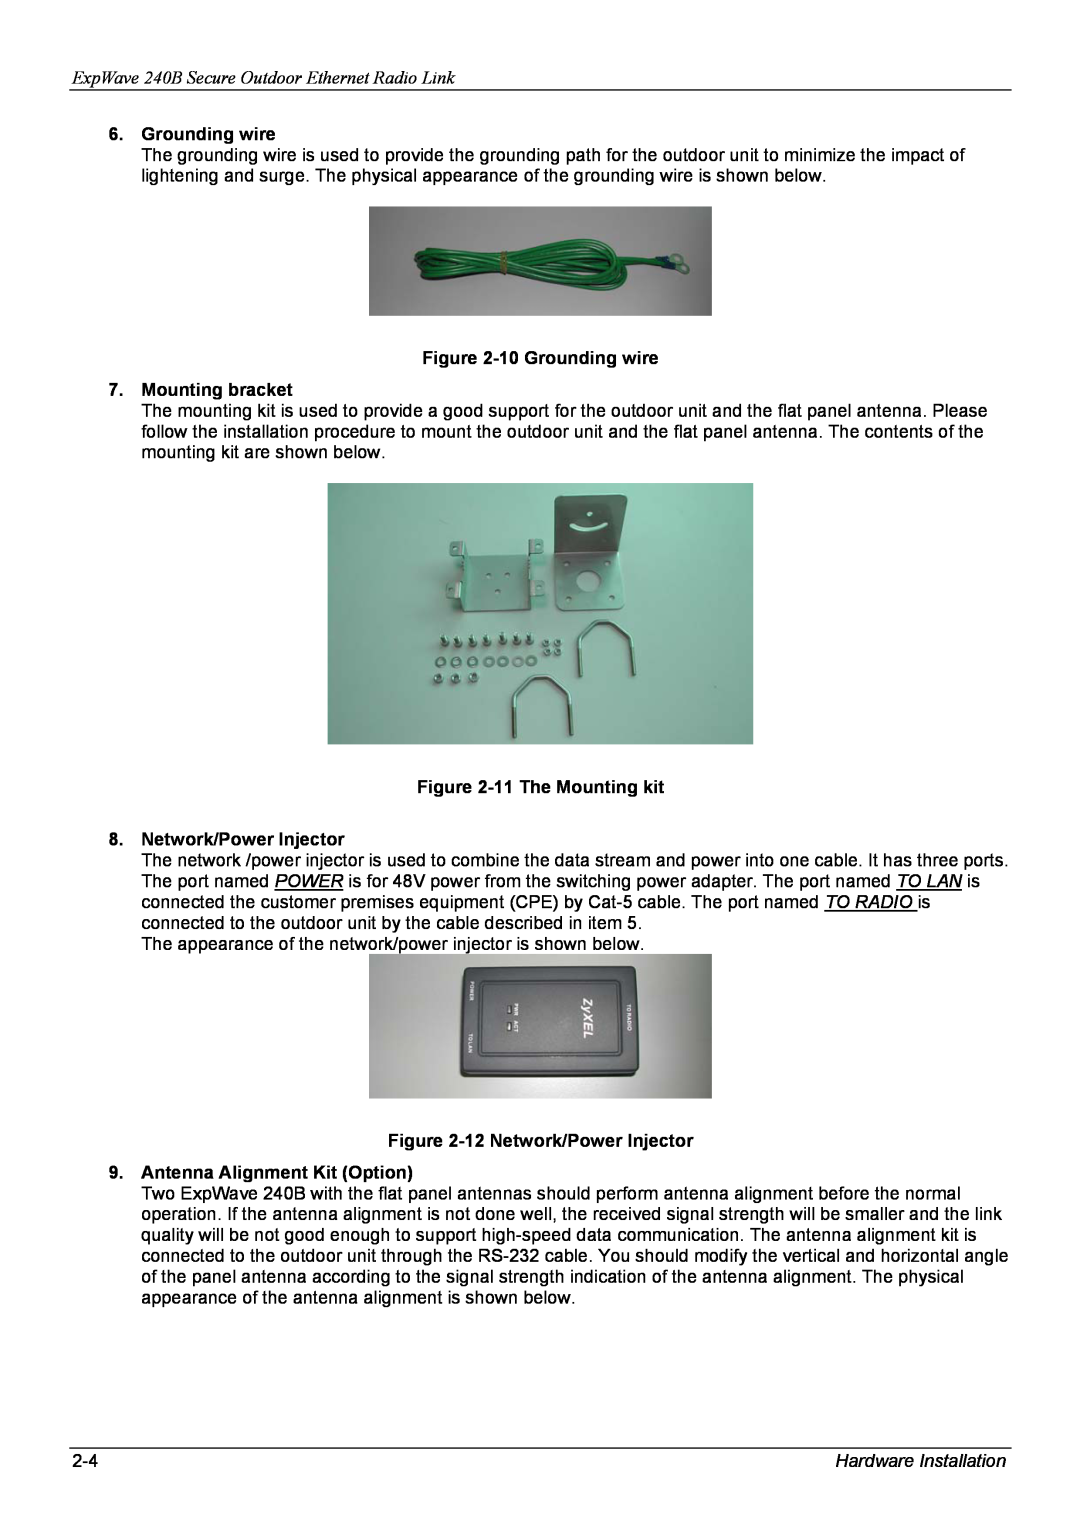 ZyXEL Communications manual ExpWave 240B Secure Outdoor Ethernet Radio Link, Grounding wire, Hardware Installation 